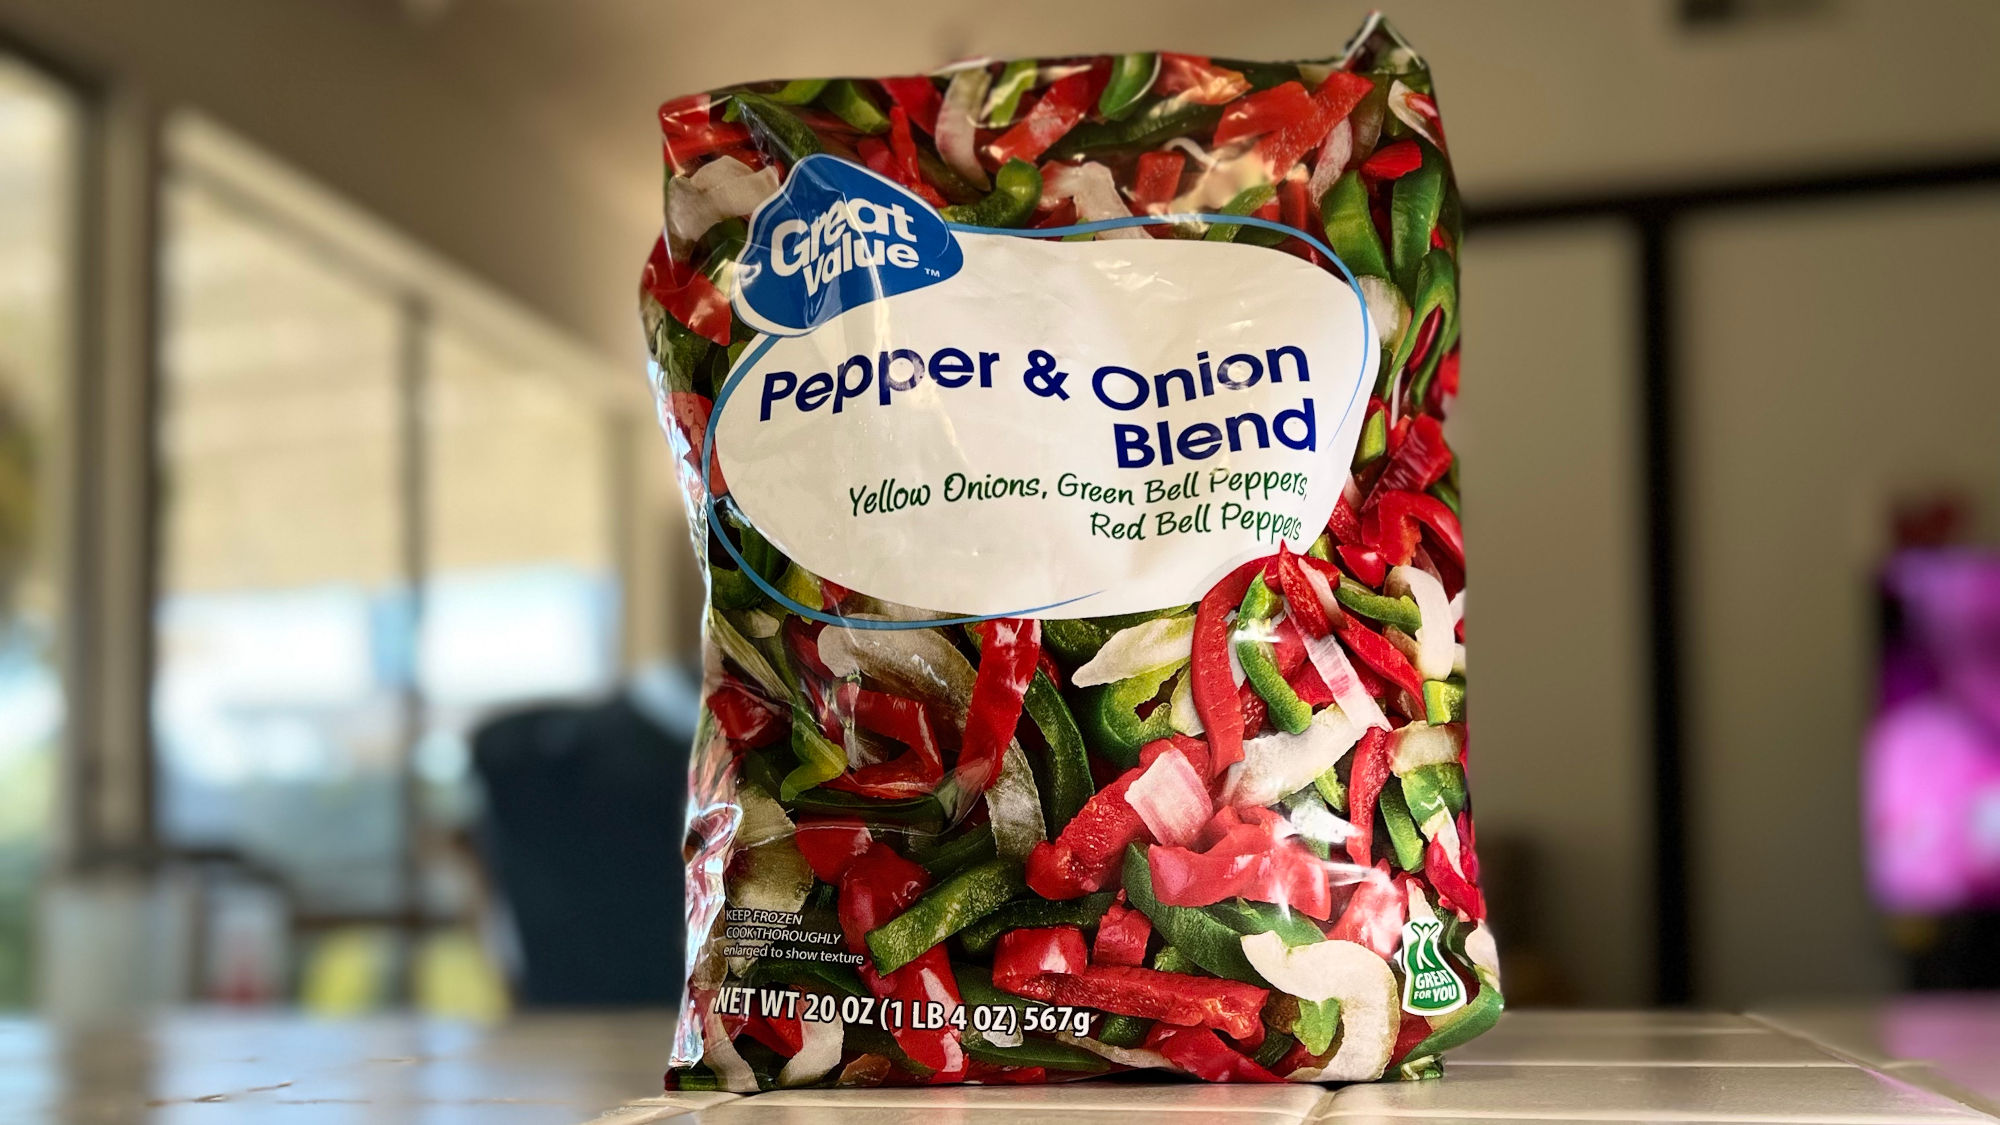 https://www.eatlife.net/want/images/great-value-peppers-and-onion-blend.jpg